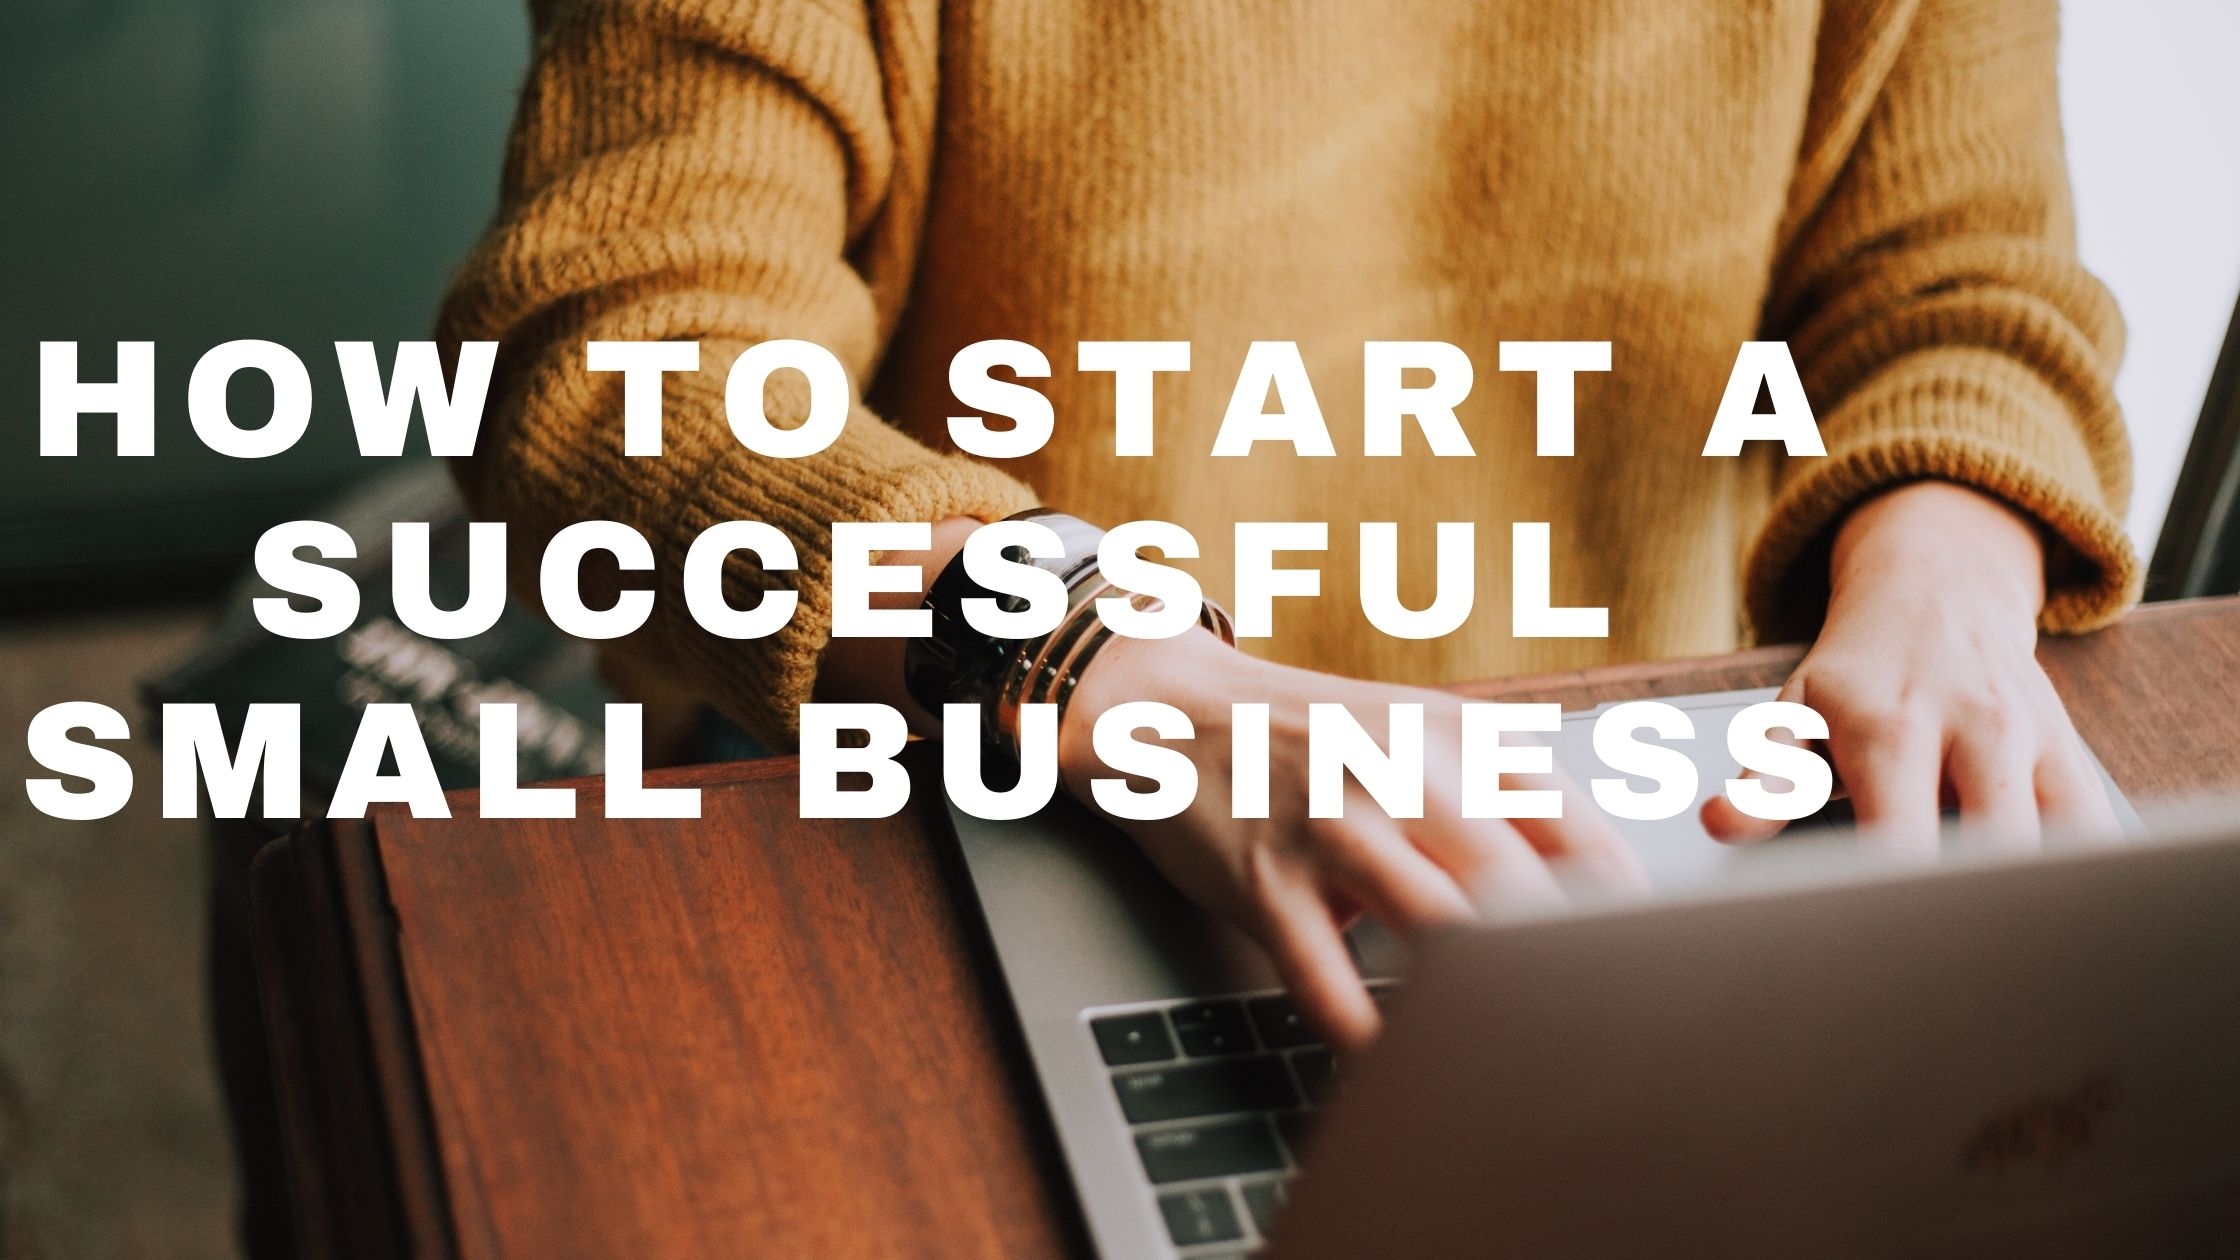 How to Start a Successful Small Business - How to Start a Successful Small Business